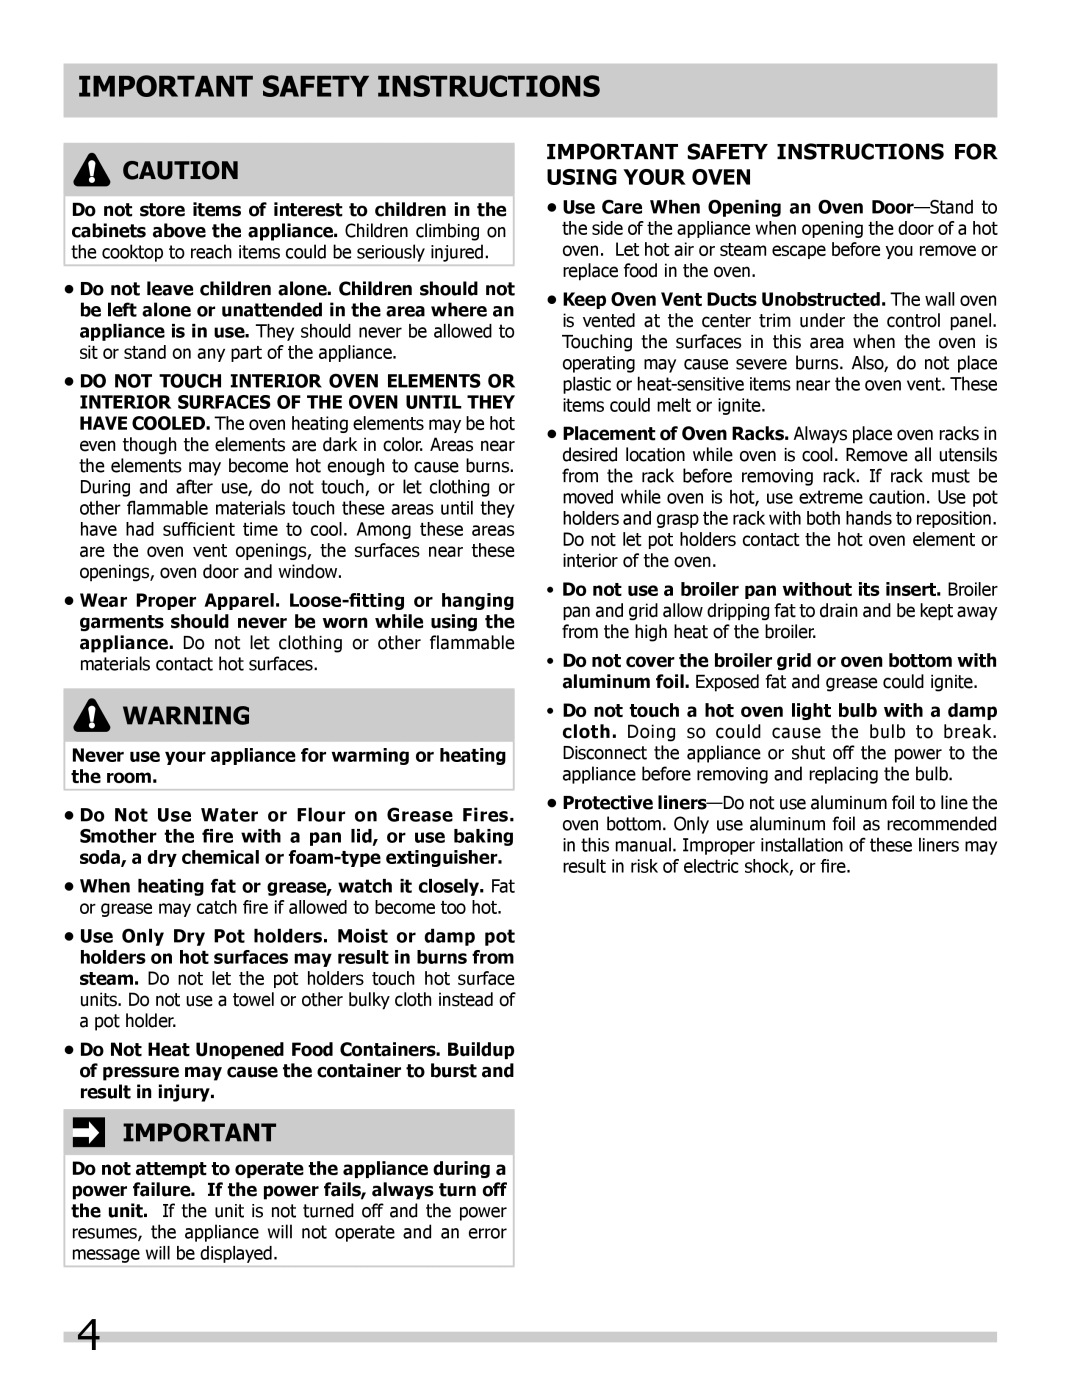 Frigidaire 318205307 Important Safety Instructions For Using Your Oven, Do Not Touch Interior Oven Elements Or 